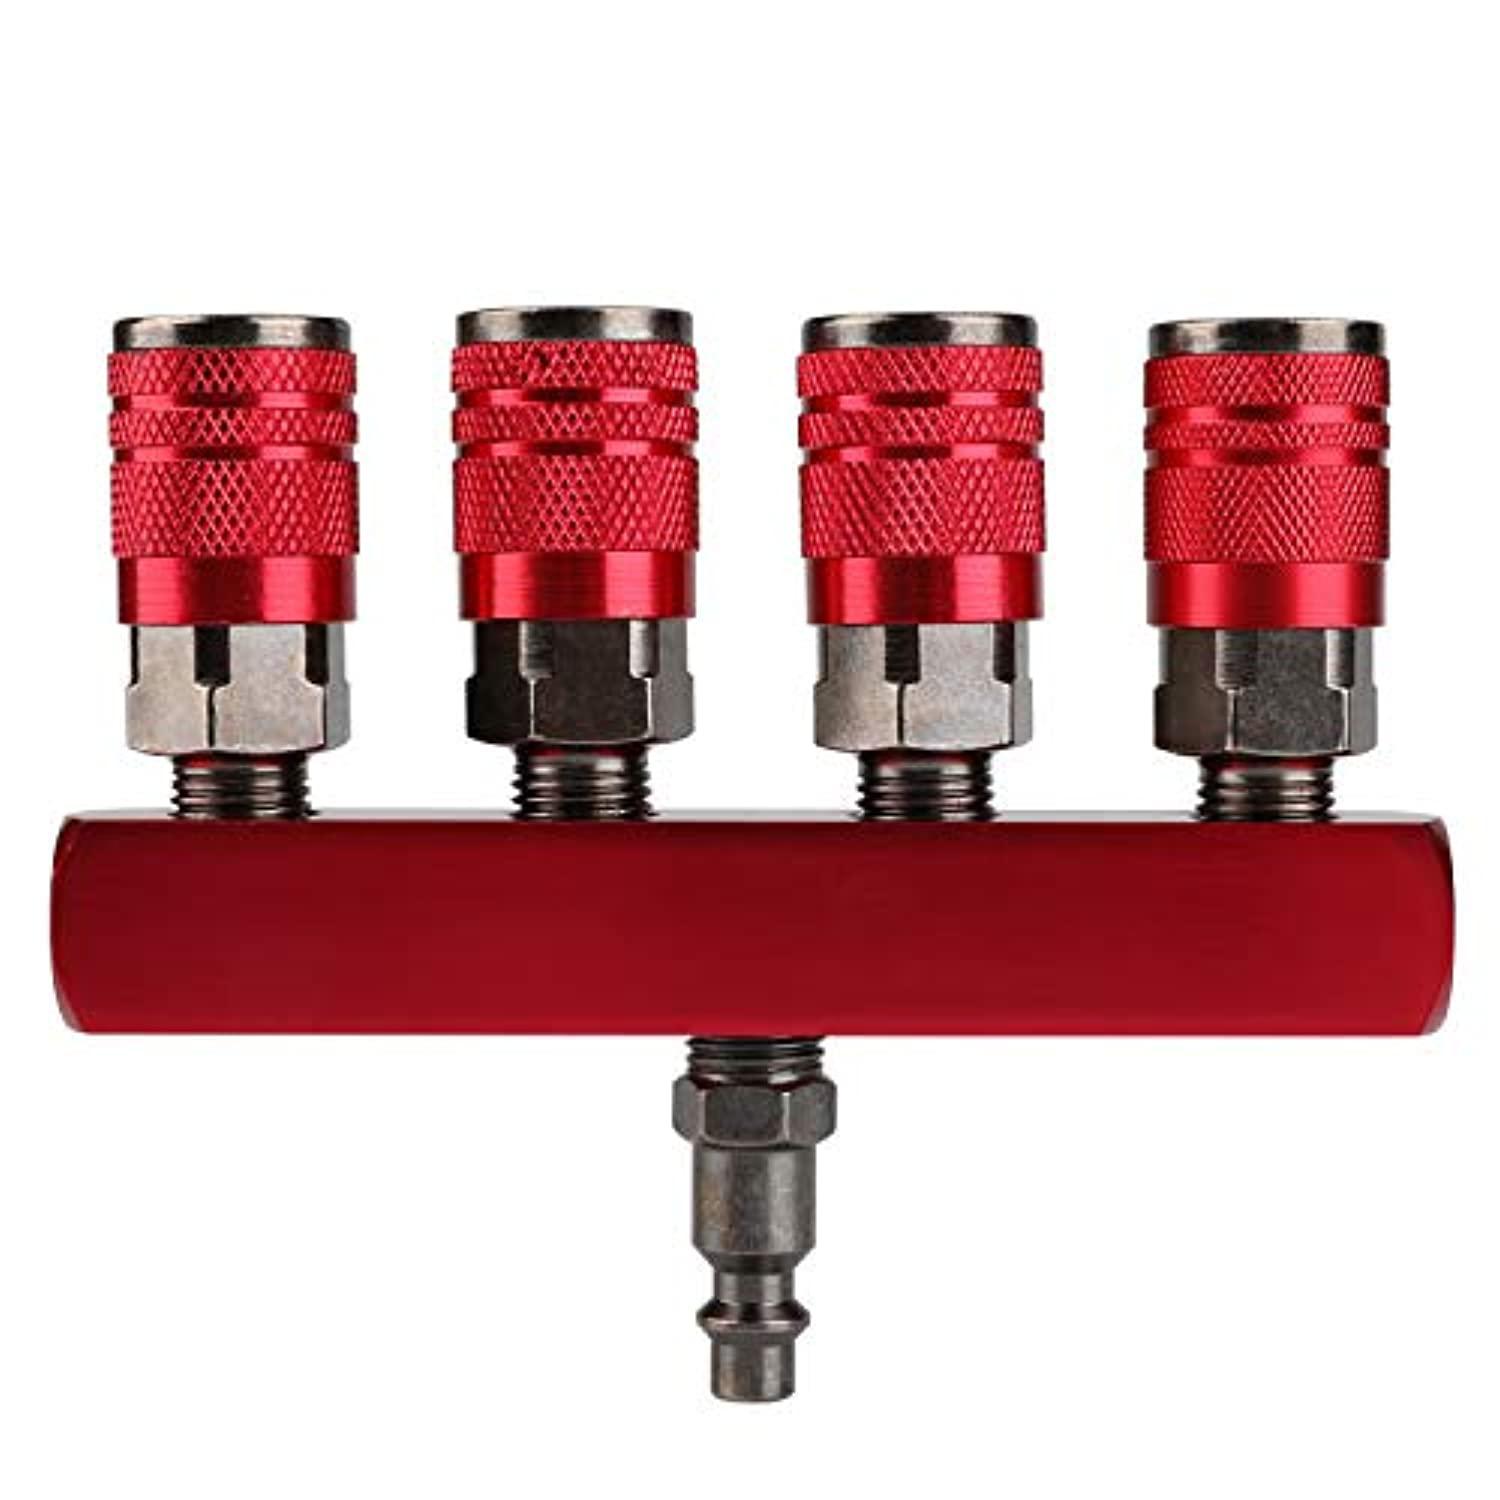 hromee 4-way straight air manifold 5 ports aluminum industrial pneumatic air compressor quick connect socket in line type air